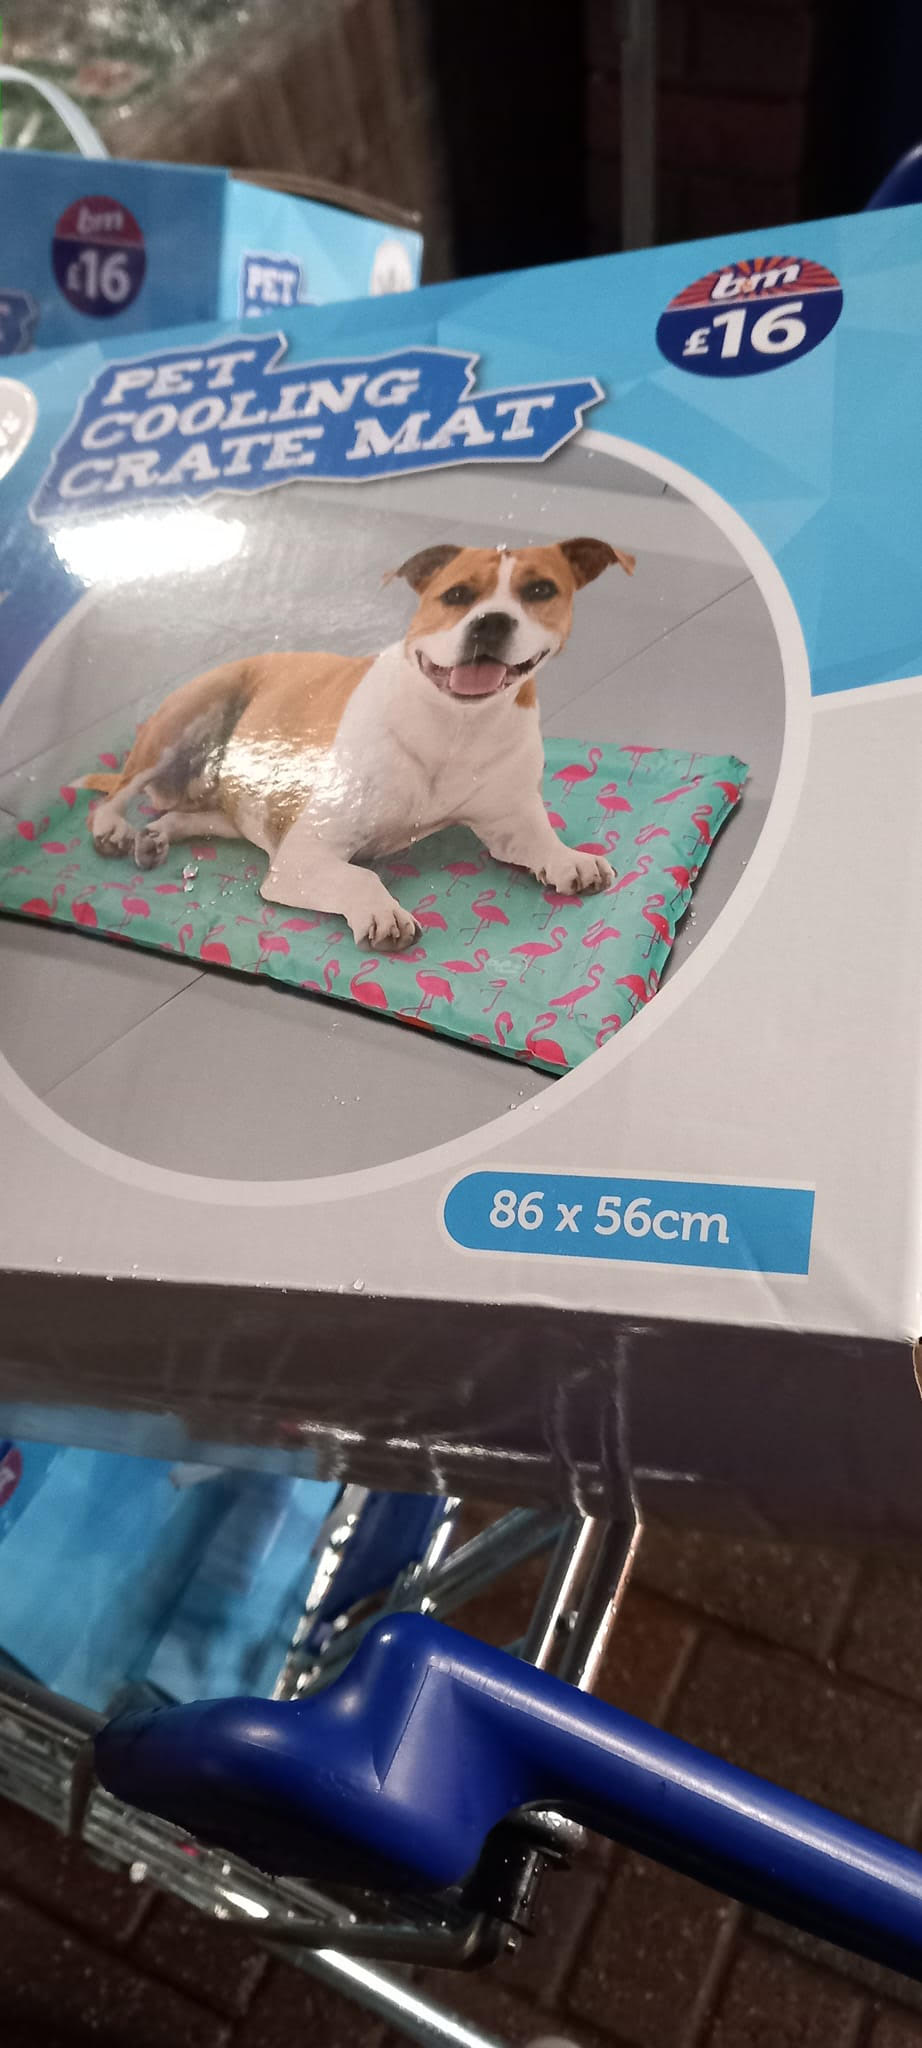 B&M shoppers go wild for pet essential scanning at tills for just 10p instead of £20